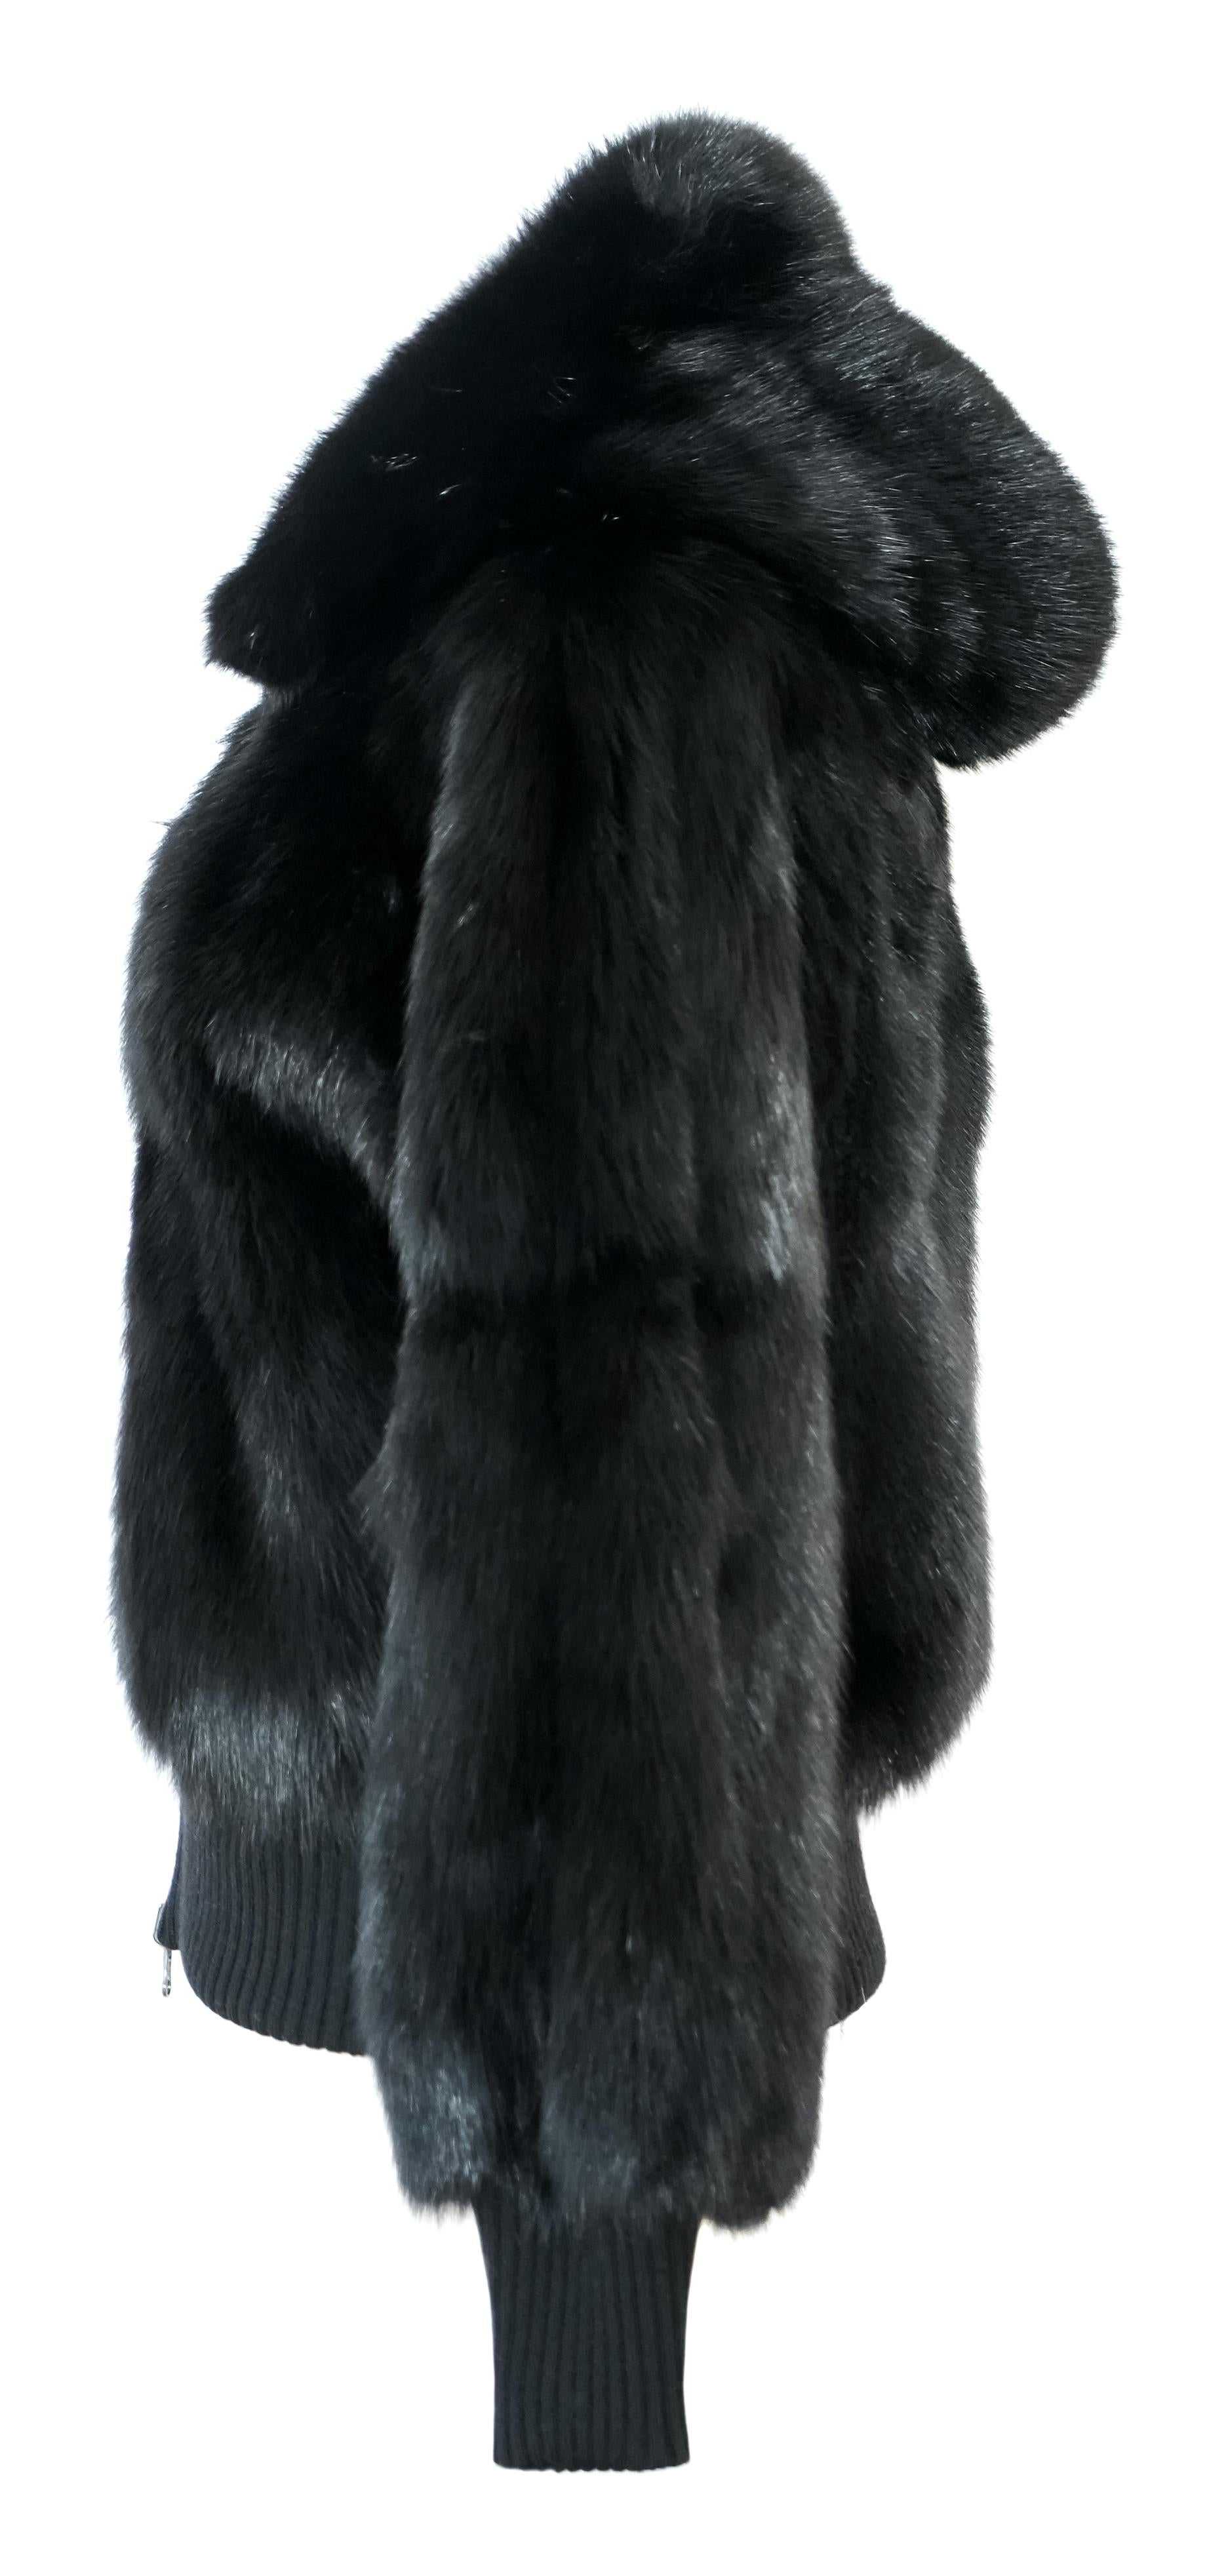 Barguzin sable jacket with stand-up collar. 100% silk lining. Fur origin - Russia. Color - black.